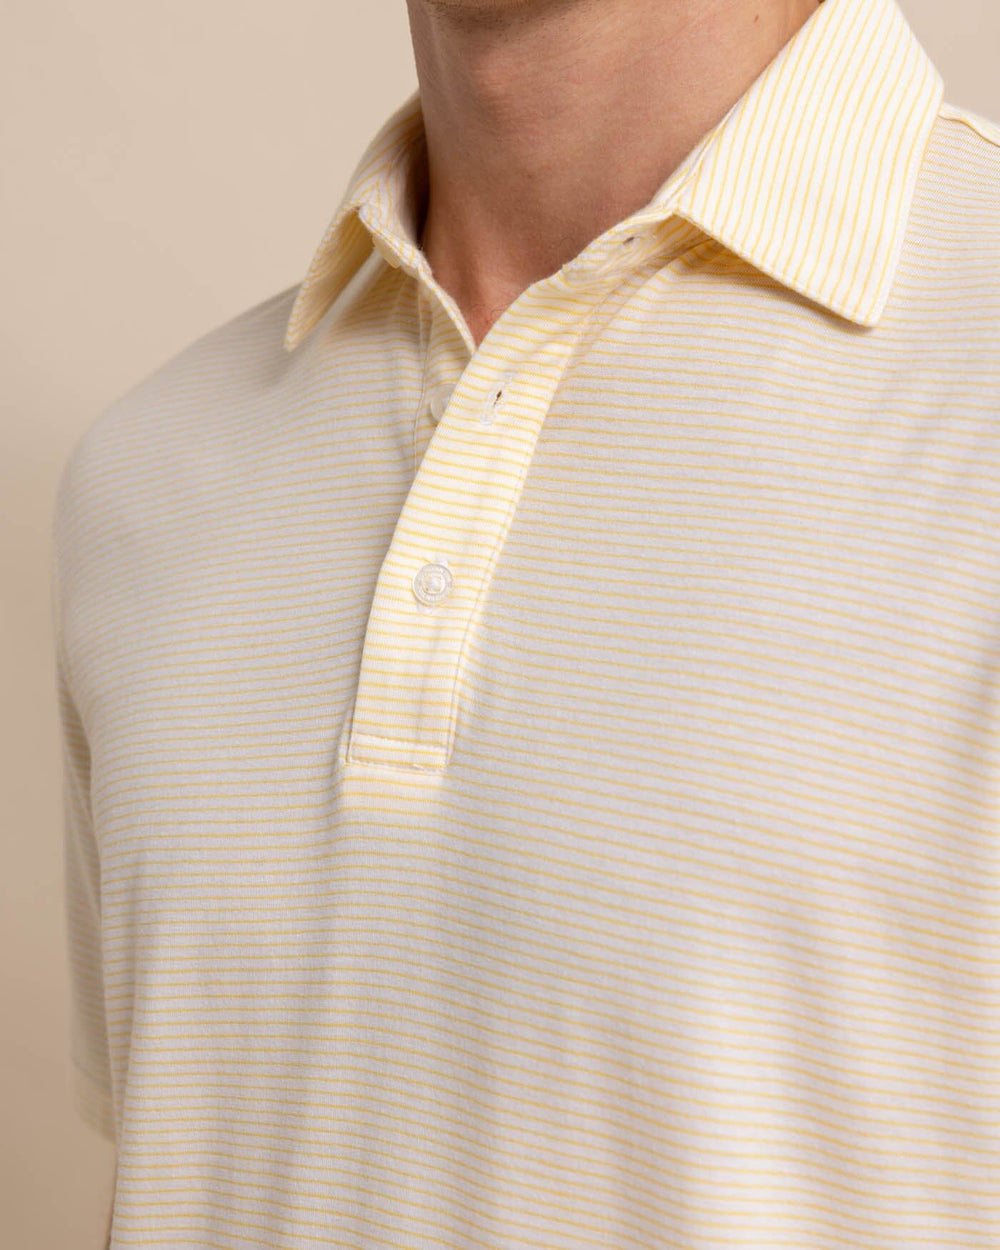 The detail view of the Southern Tide The Seaport Davenport Stripe Polo by Southern Tide - Beach Ball Yellow